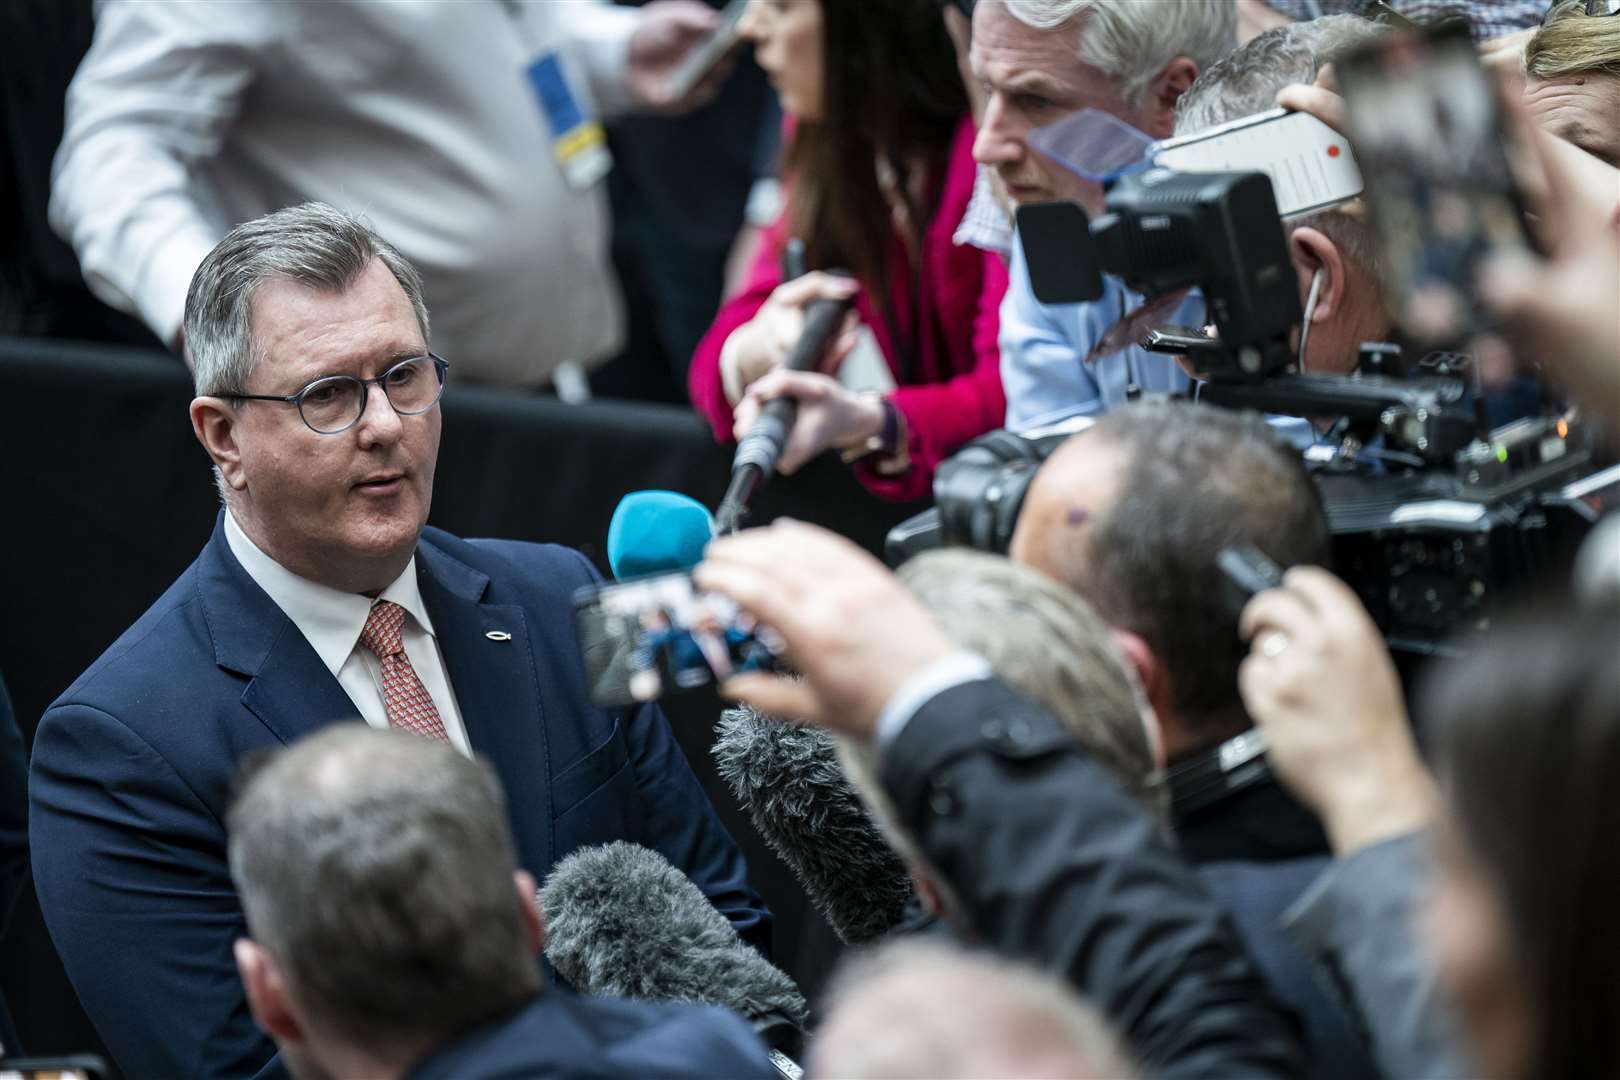 Jeffrey Donaldson from the DUP speaks to the media after US President Joe Biden delivered his keynote speech at Ulster University in Belfast (Aaron Chown/PA)